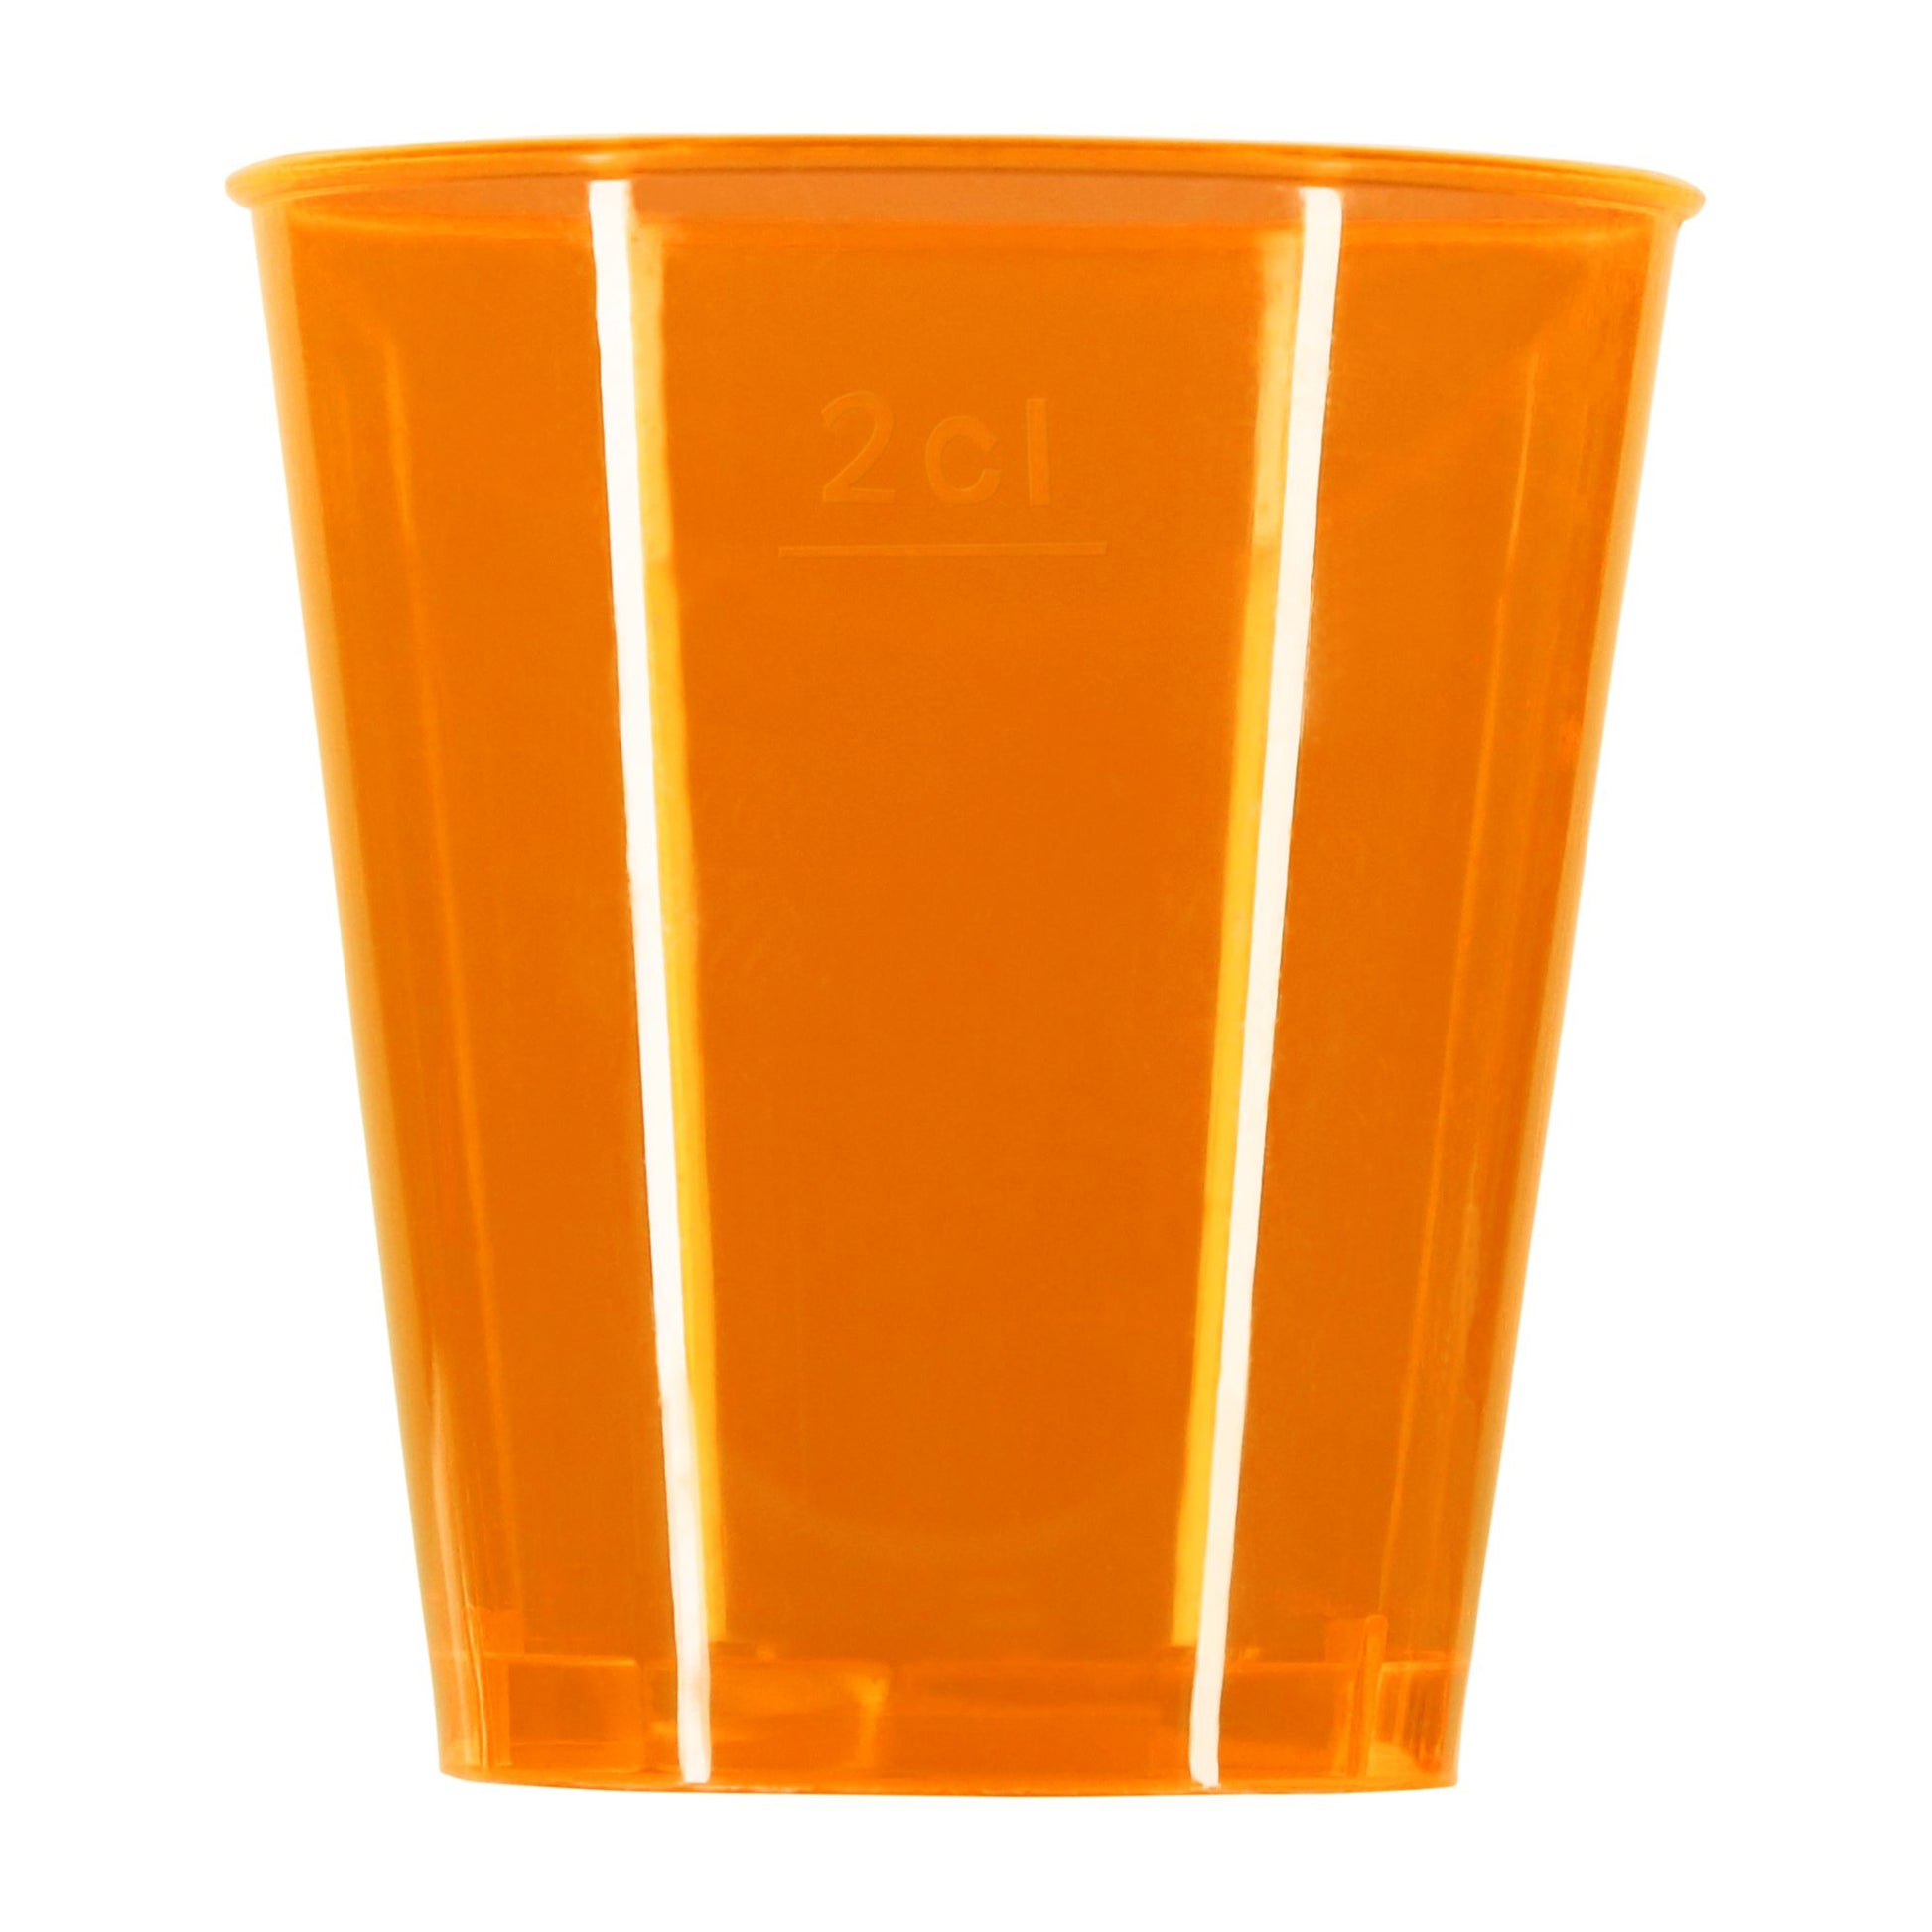 1296 x Neon Shot Glasses Plastic Marked 3cl 30ml Bright Colour Jelly Disposable-5056020179825-PCUP-3CLDISx36-Product Pro-30ml, Bright Shot Glasses, Disposable Shot Glasses, Neon, Neon Shot Glasses, Plastic Shot Glasses, Shots